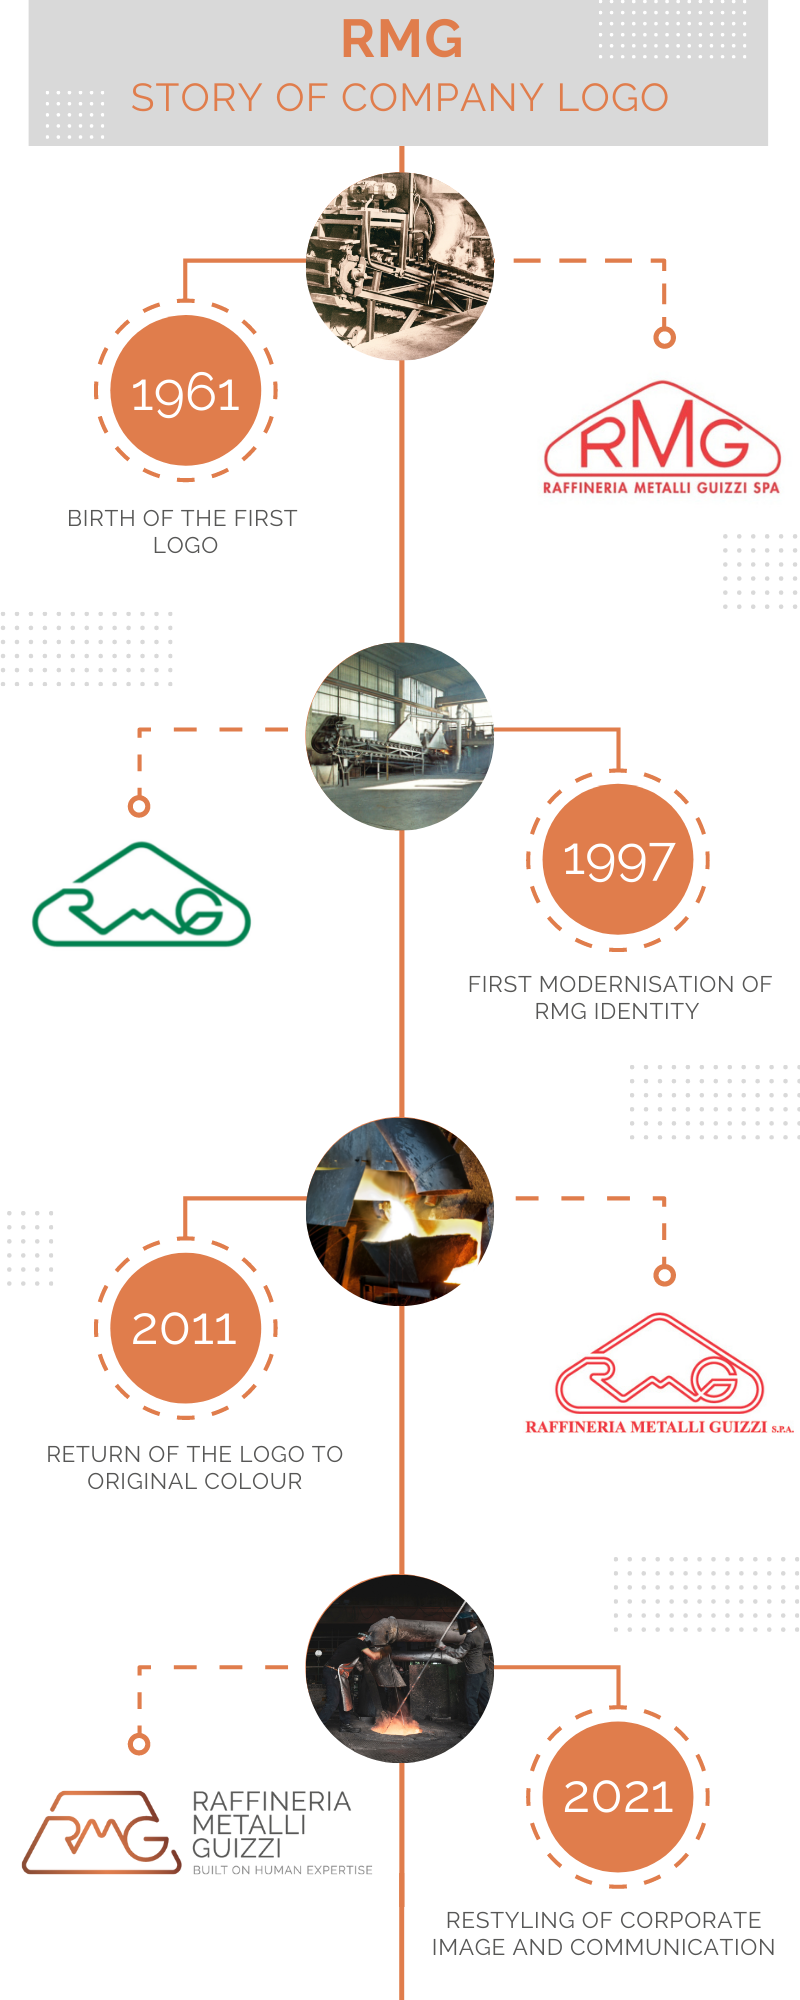 The main phases of RMG logo evolution since 1961 to 2021